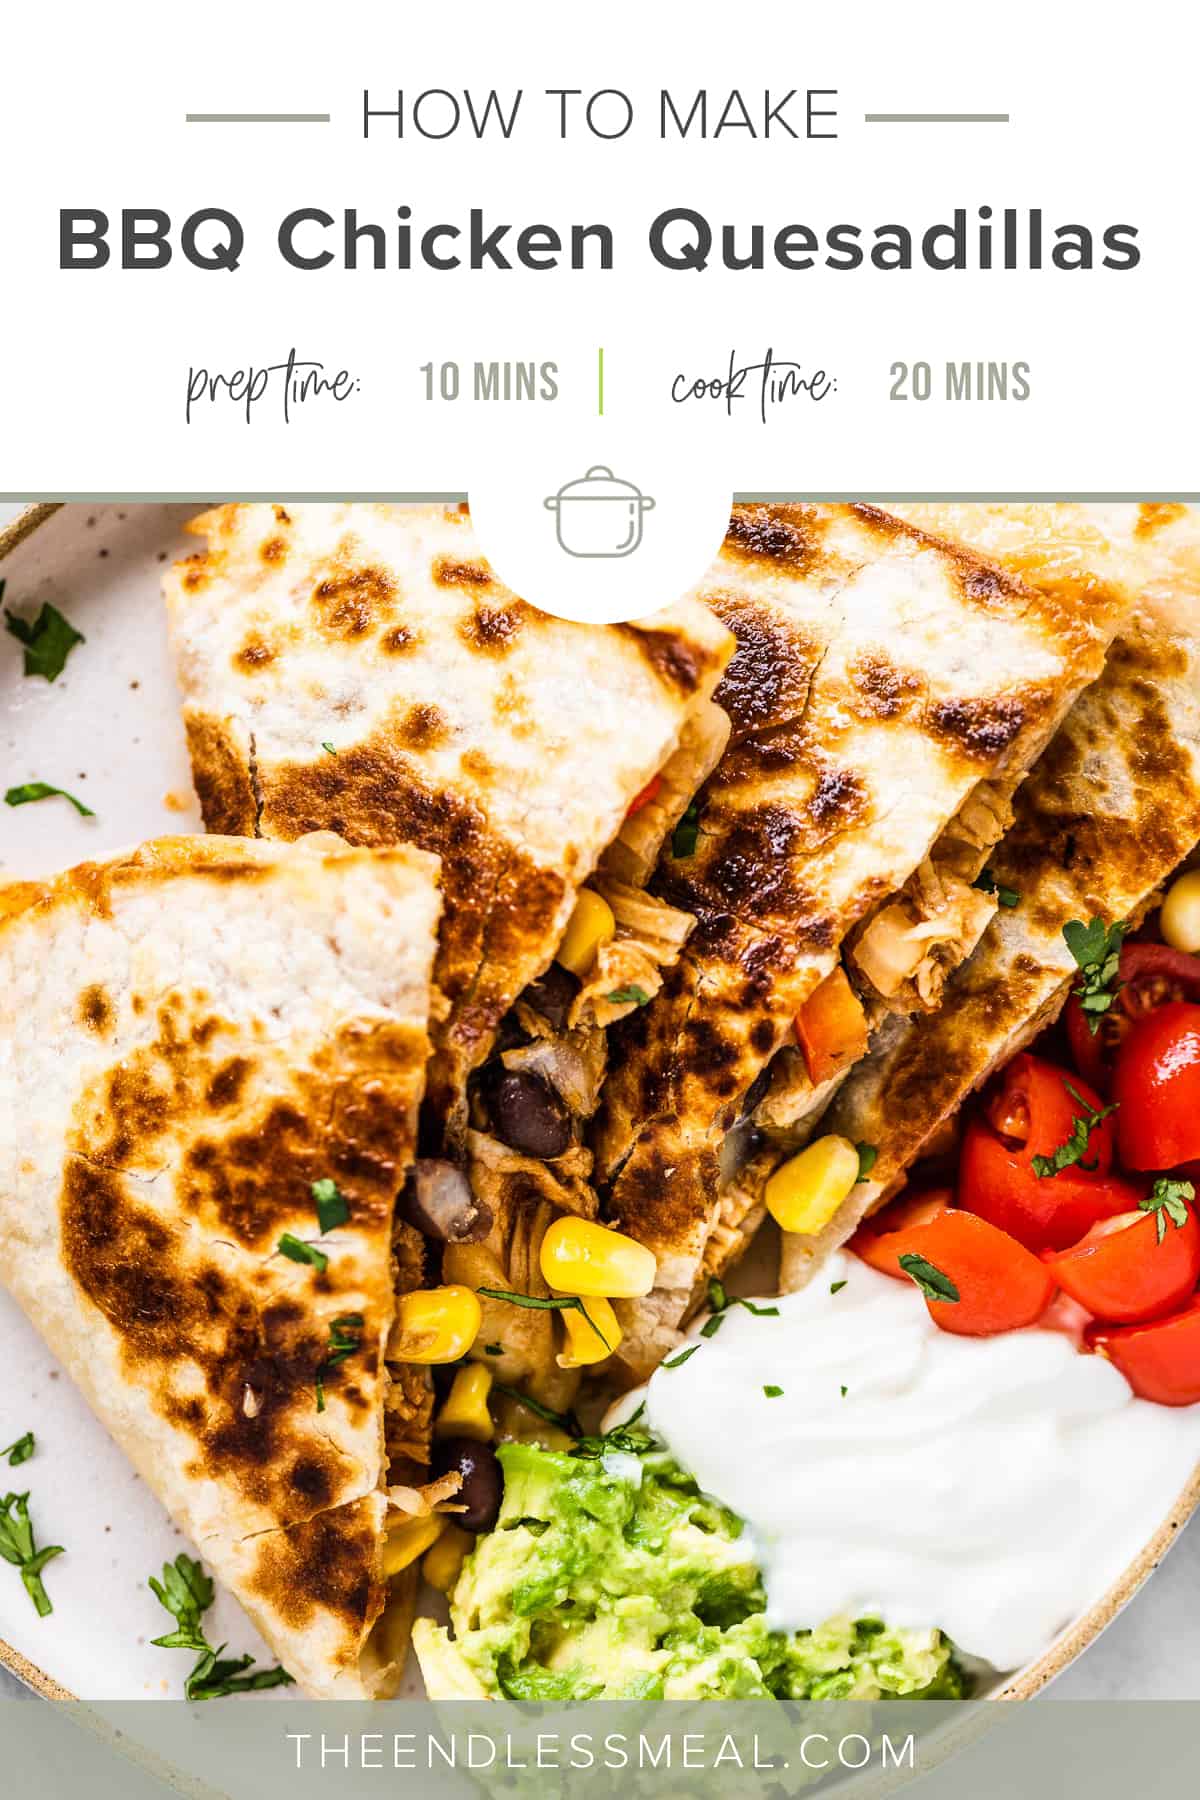 A bbq chicken quesadilla on a white plate with sour cream, guacamole, and salsa on the side and the recipe title on top of the picture.